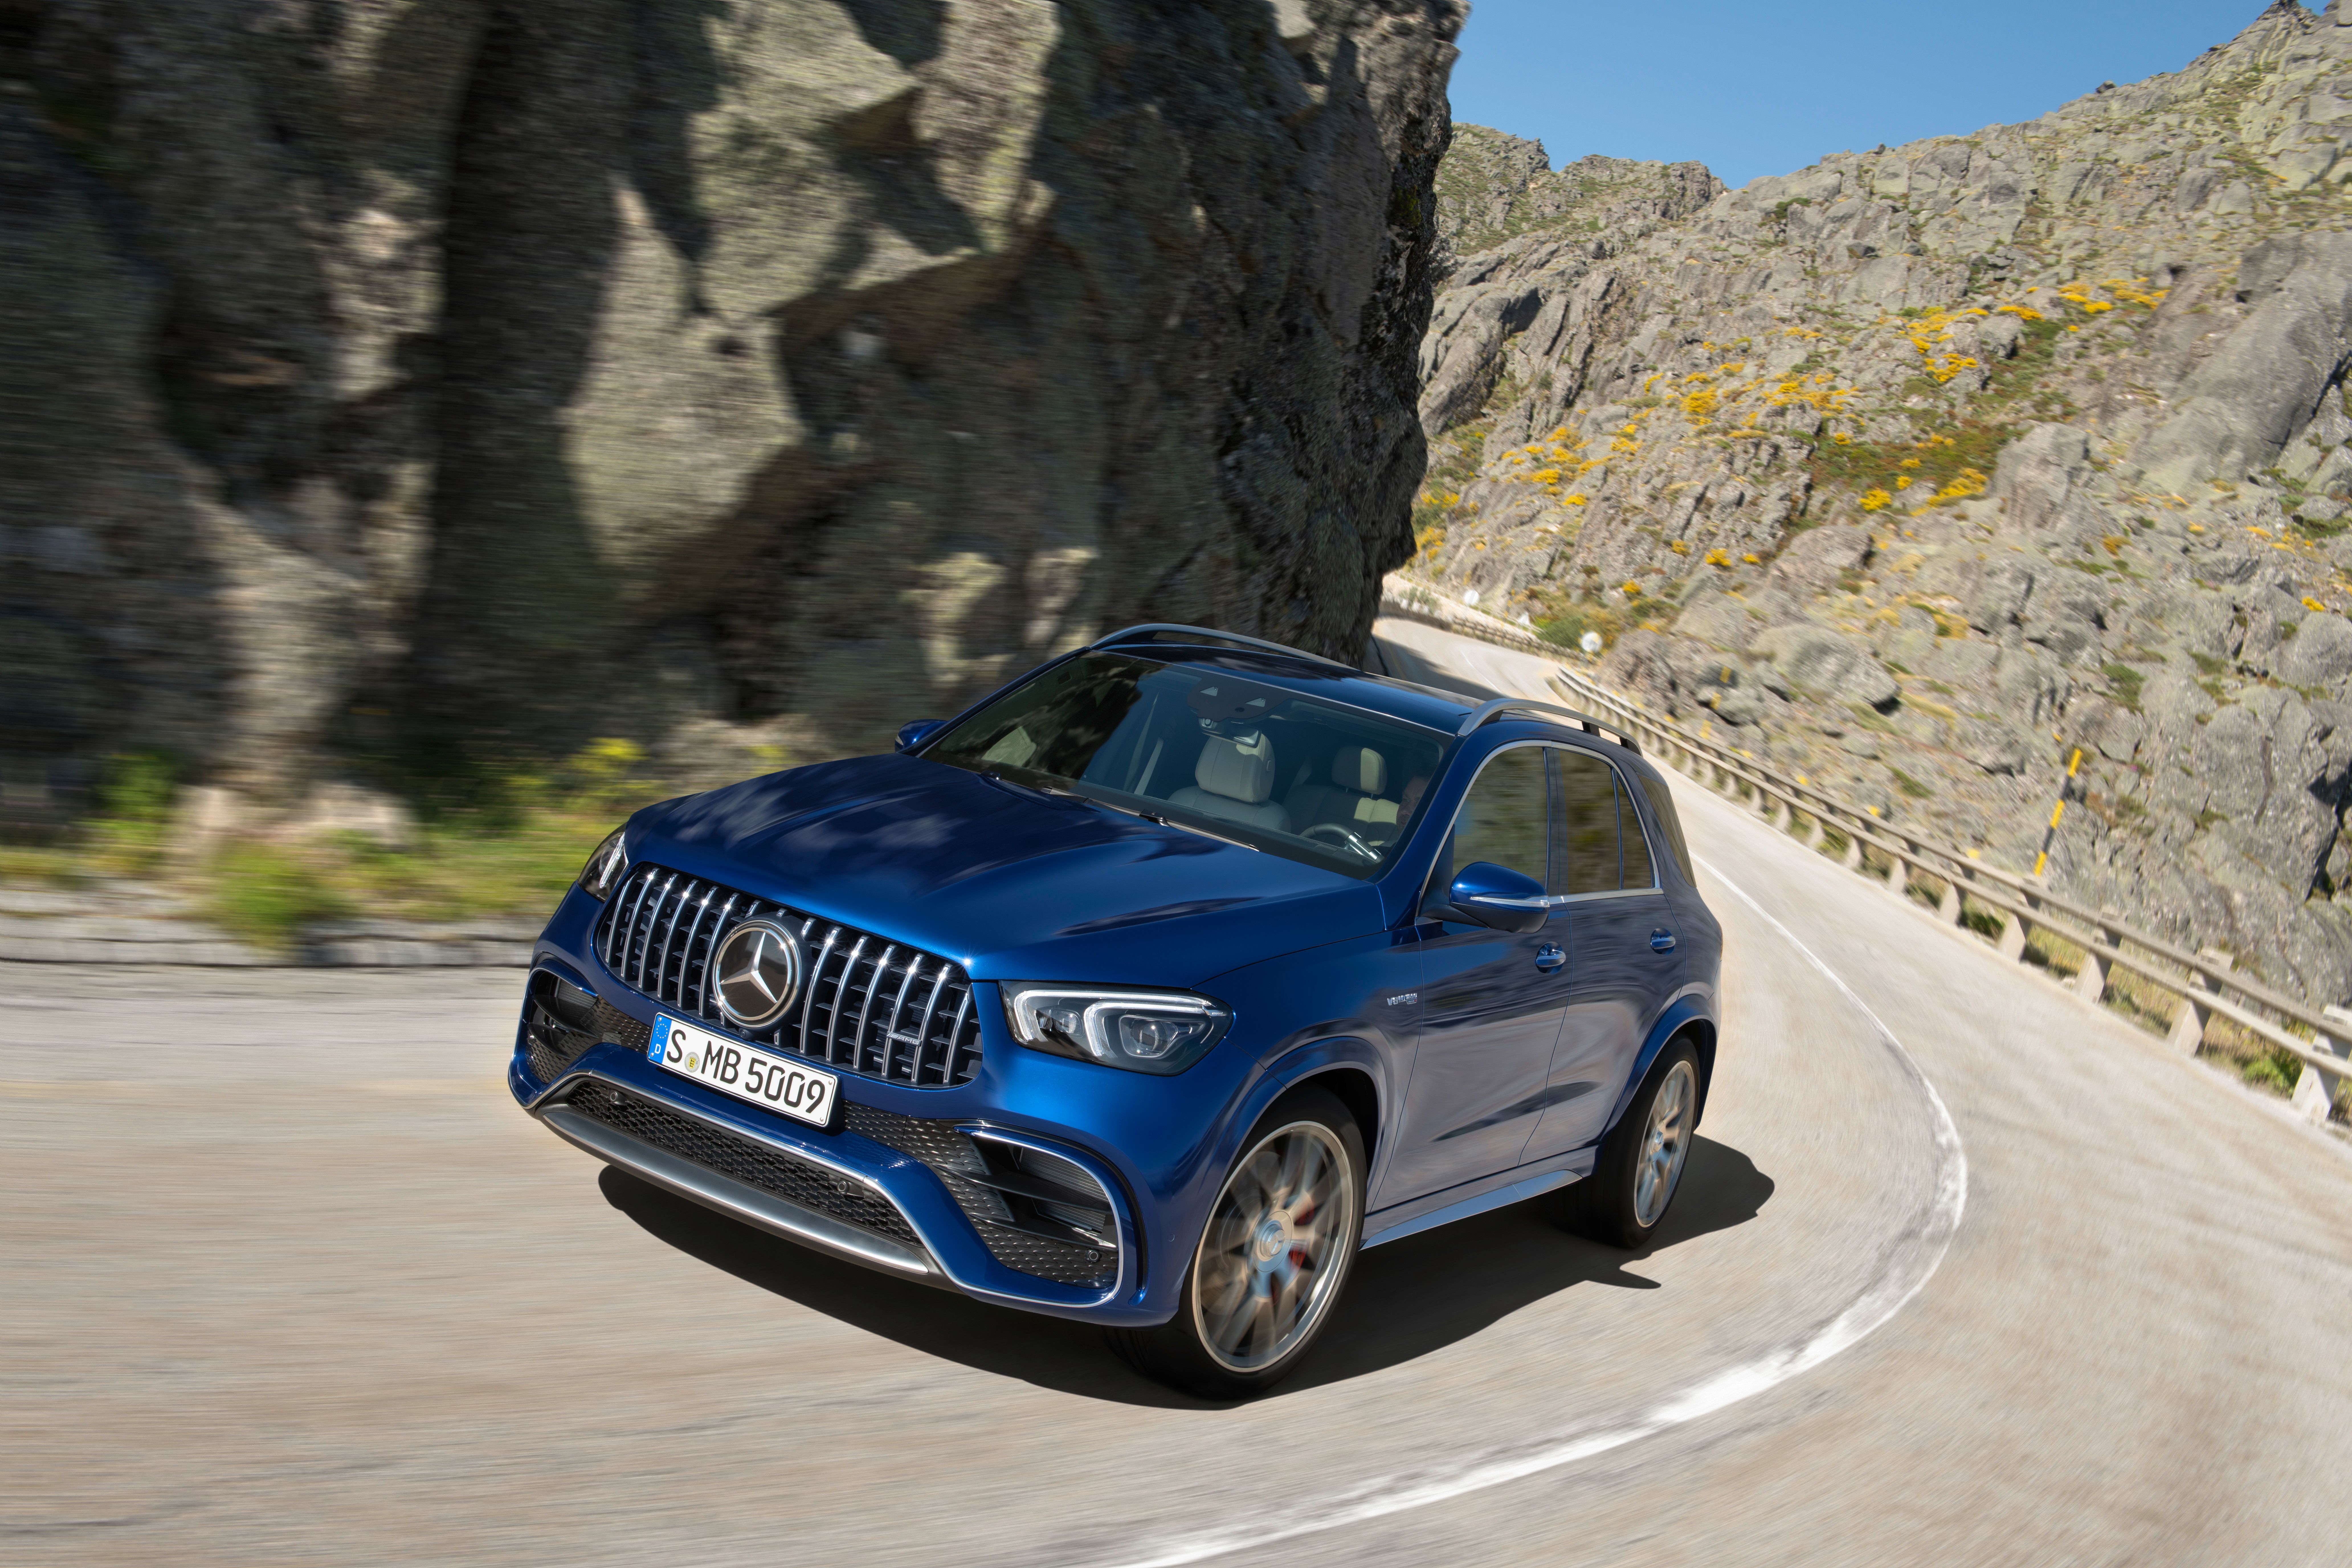 2019 2021 Mercedes-AMG GLE 63 S picture gallery